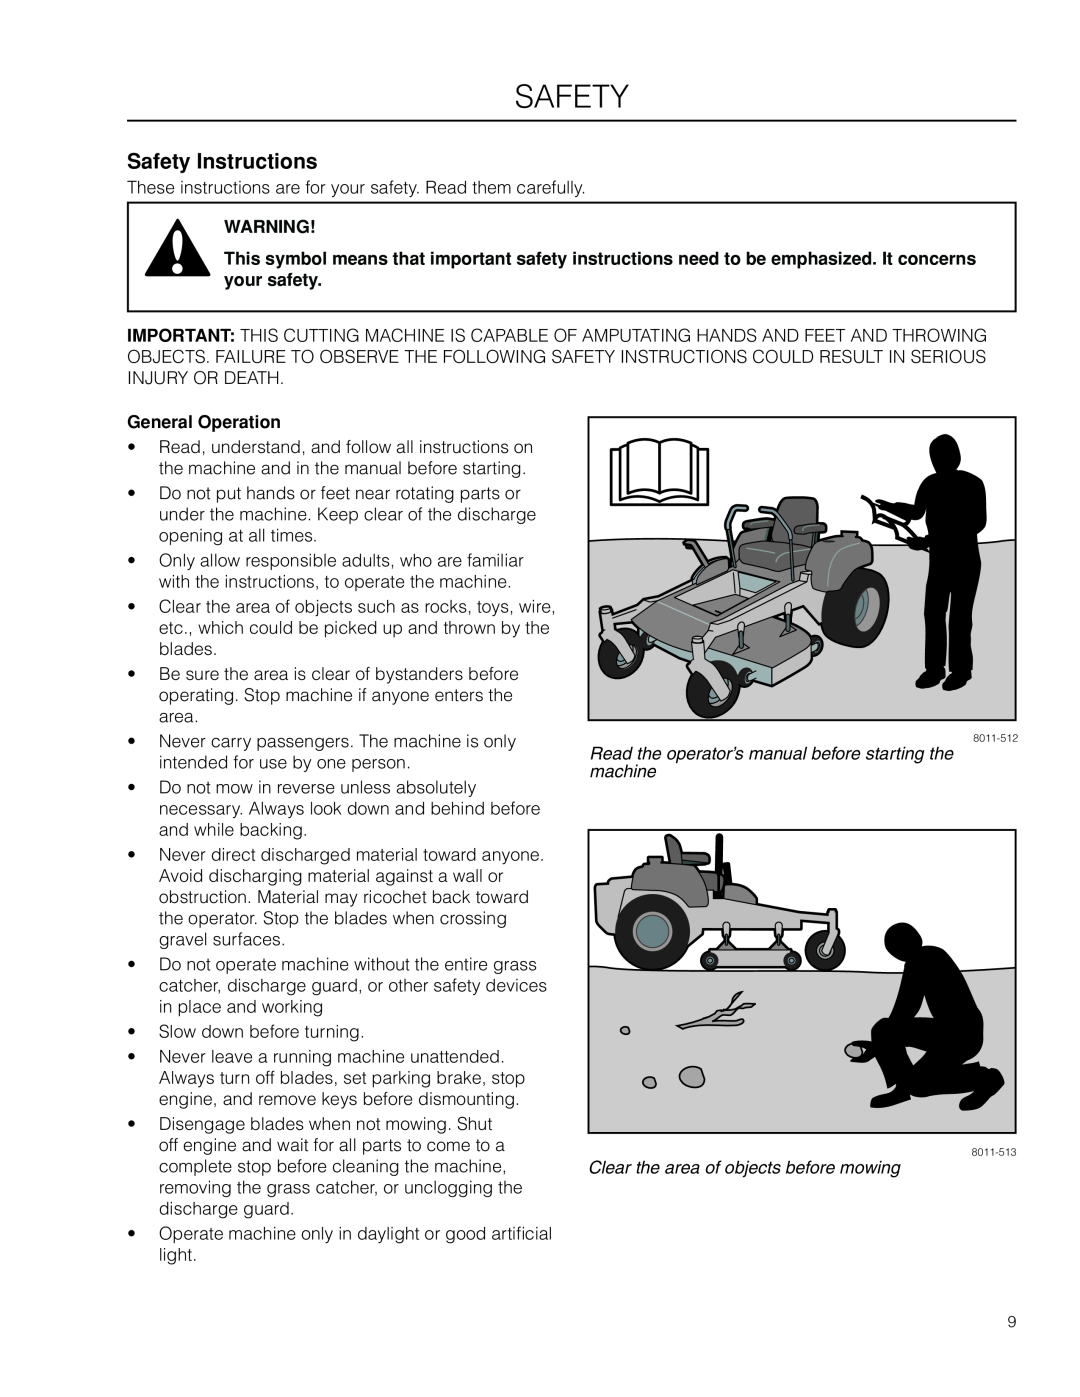 Husqvarna RZ4824F / 966678301, RZ5424 / 966659301, RZ4621 Safety Instructions, Clear the area of objects before mowing 